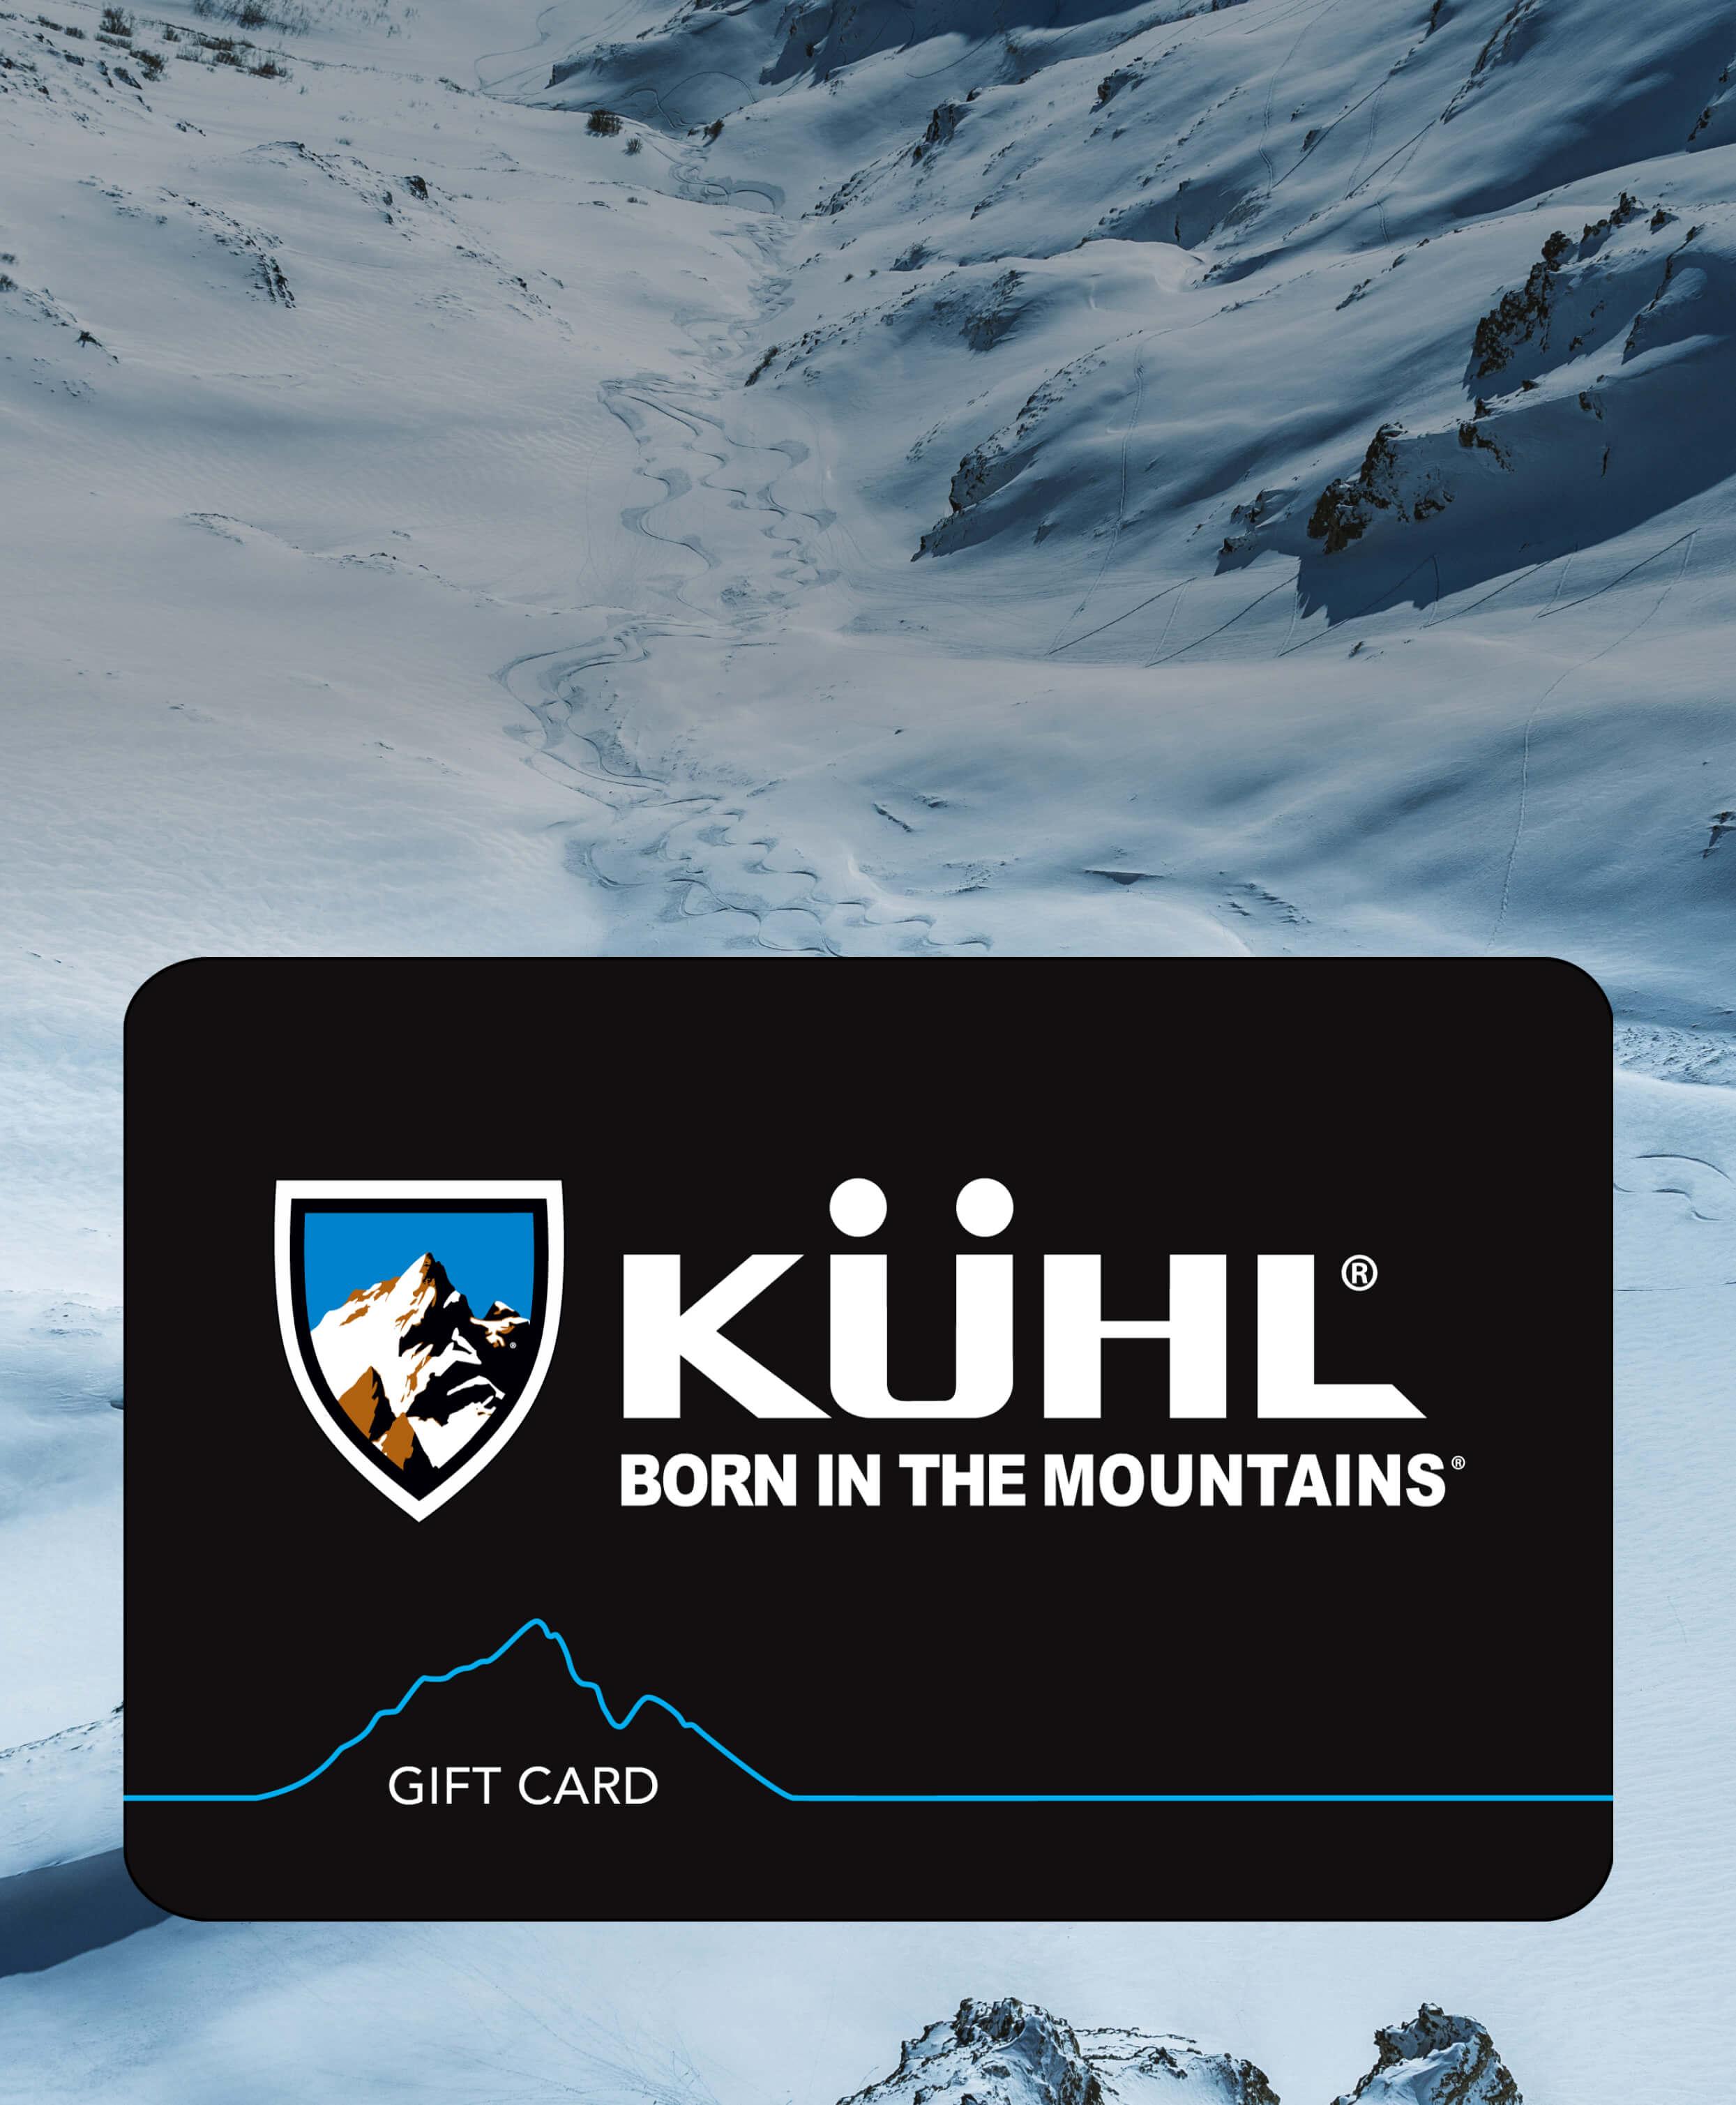 Photo of mountains and a KUHL.com gift card